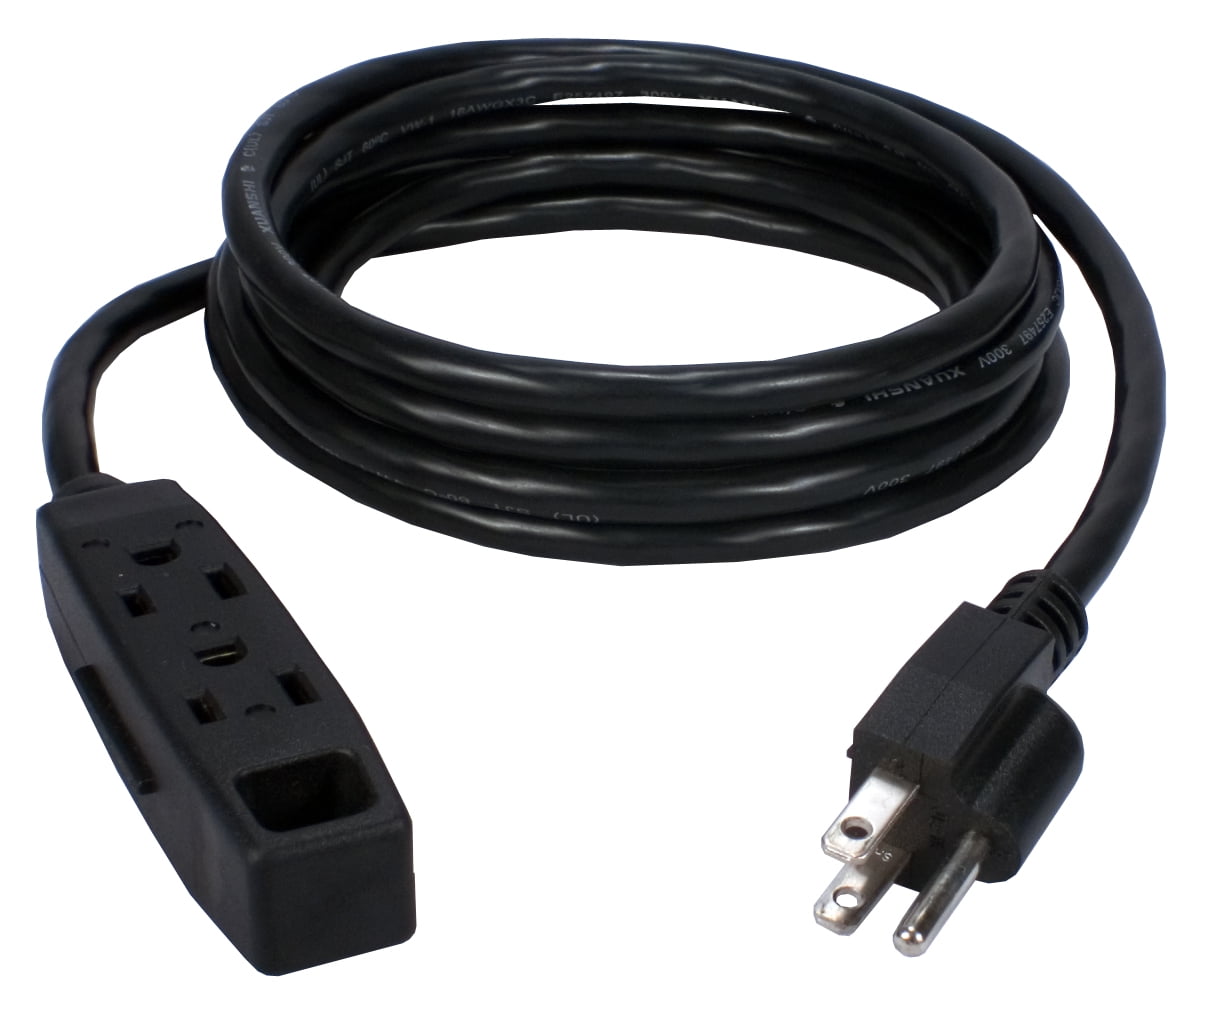 16/3 Durable Black Cable 6039154287146 10 Ft Extension Cord with 3 Electrical Power Outlet 